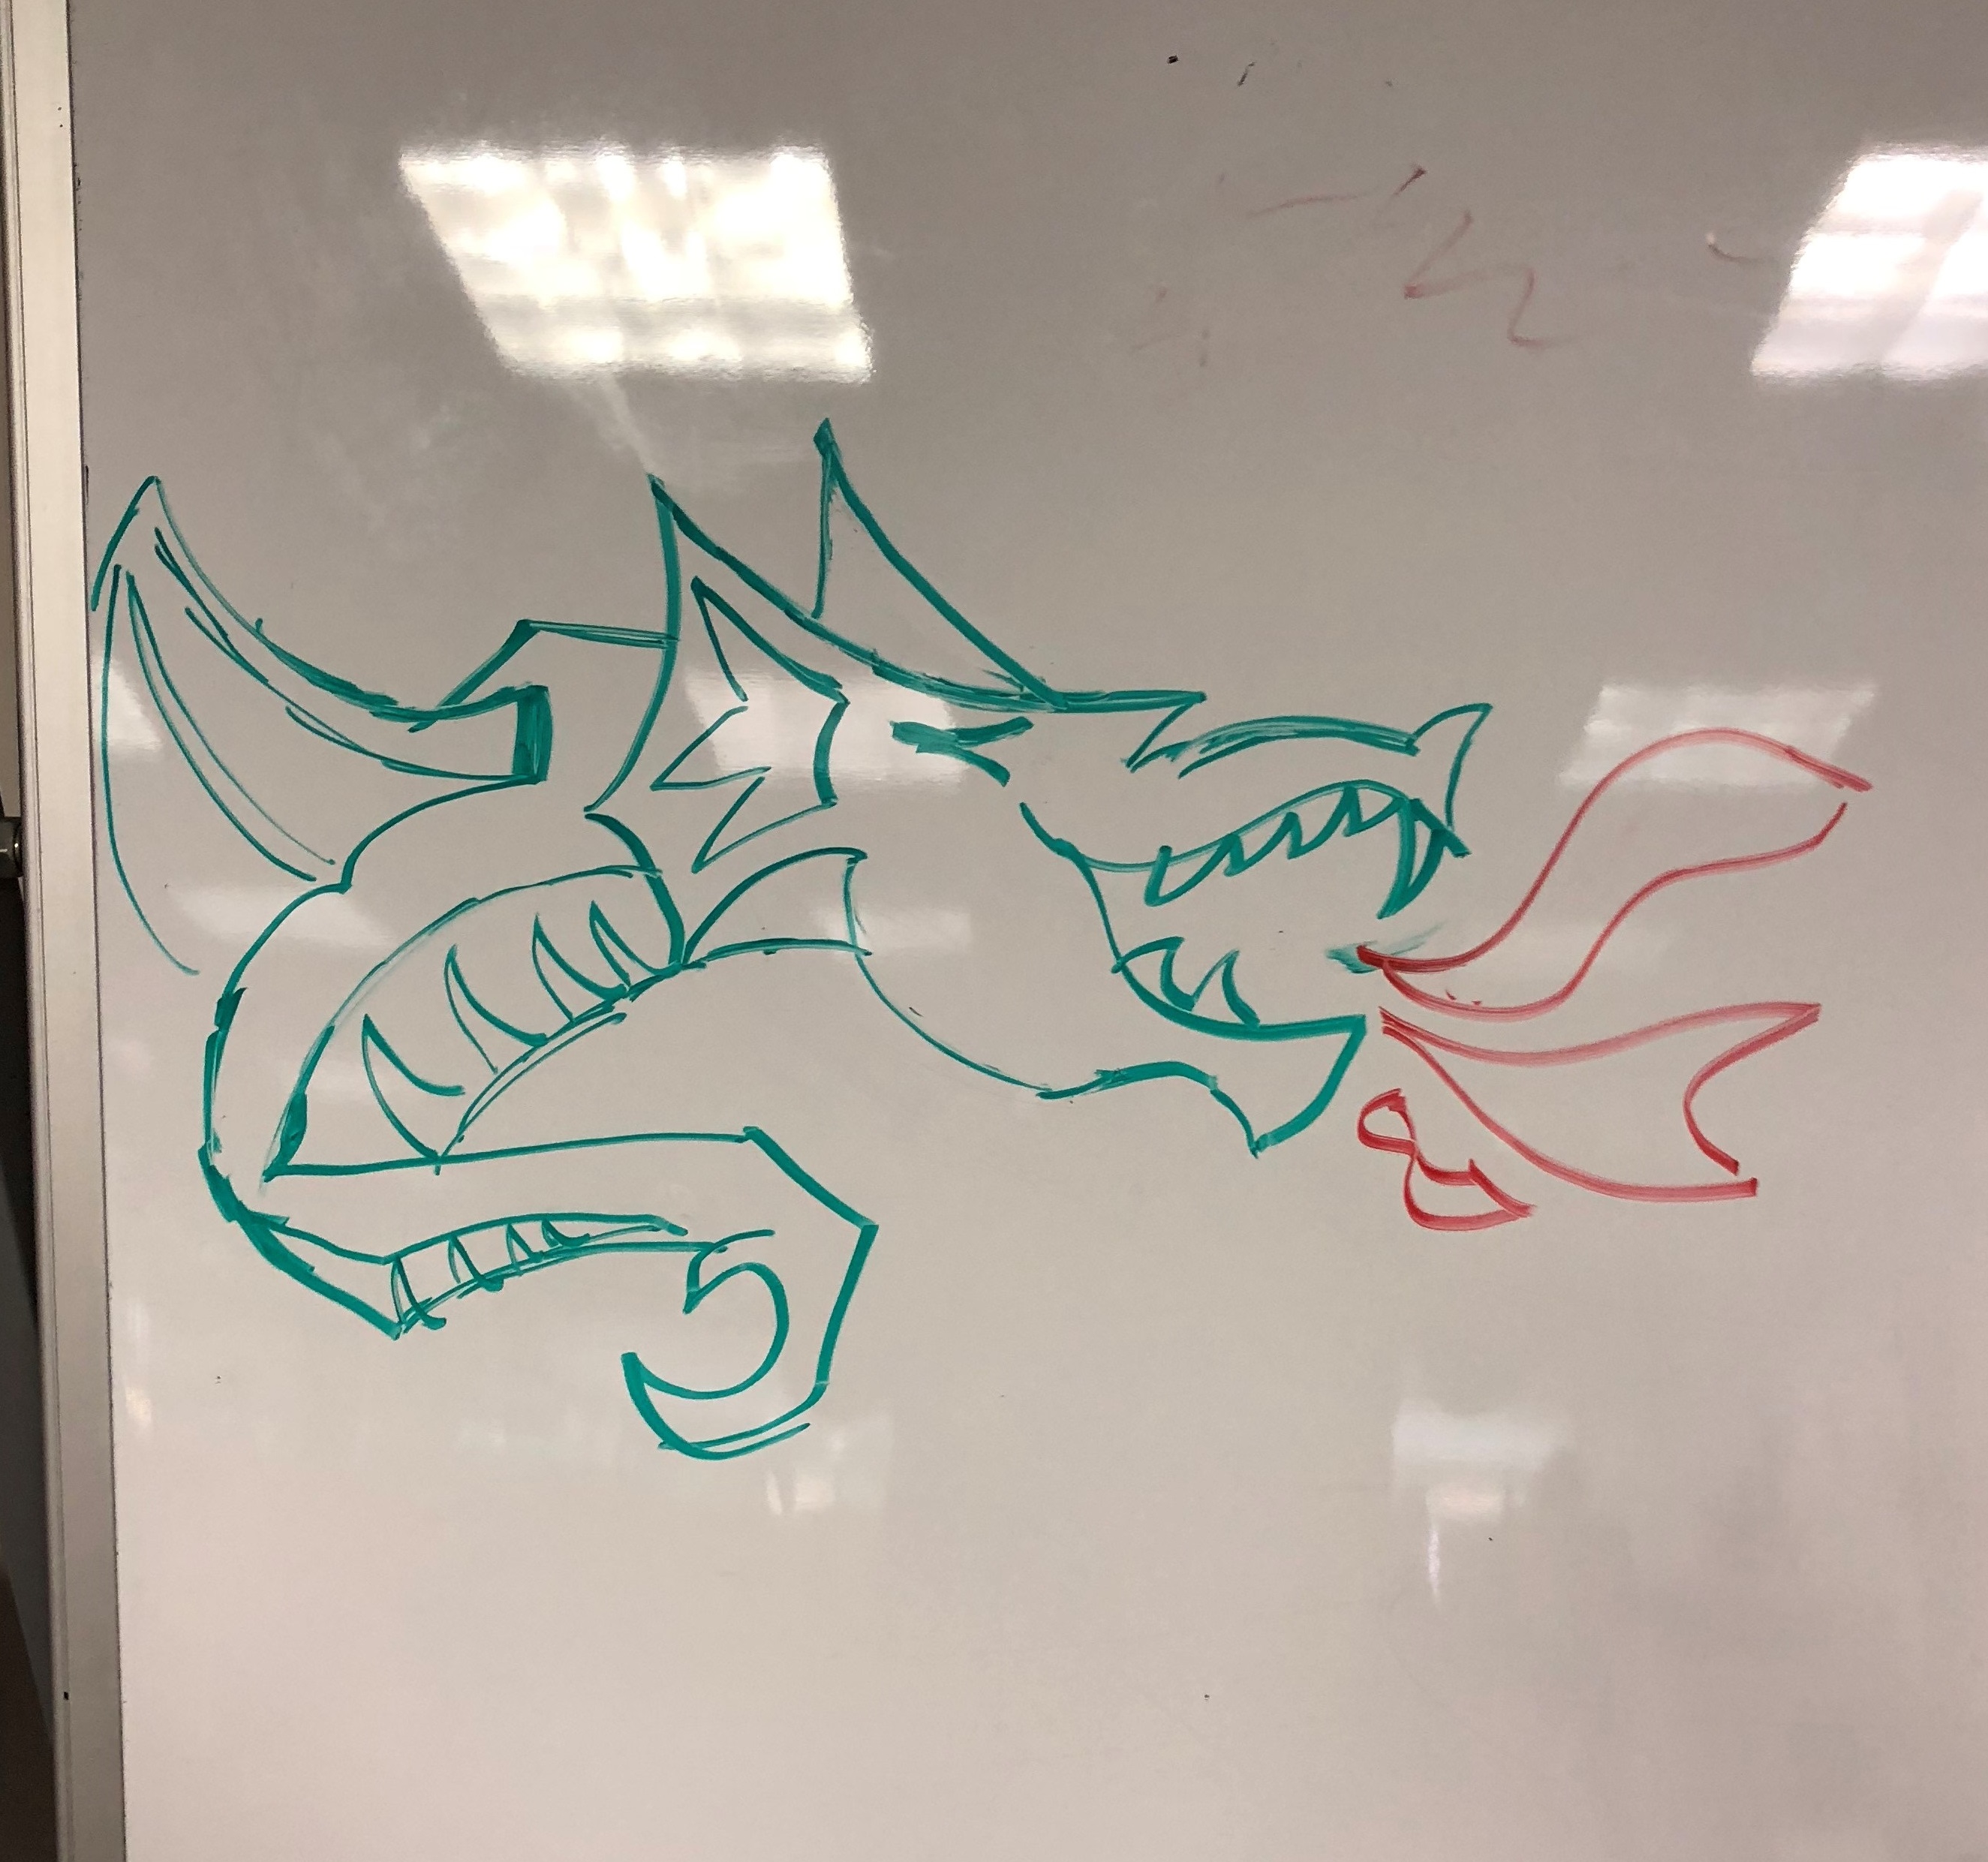 drawing of a dragon breathing fire on a dry erase board